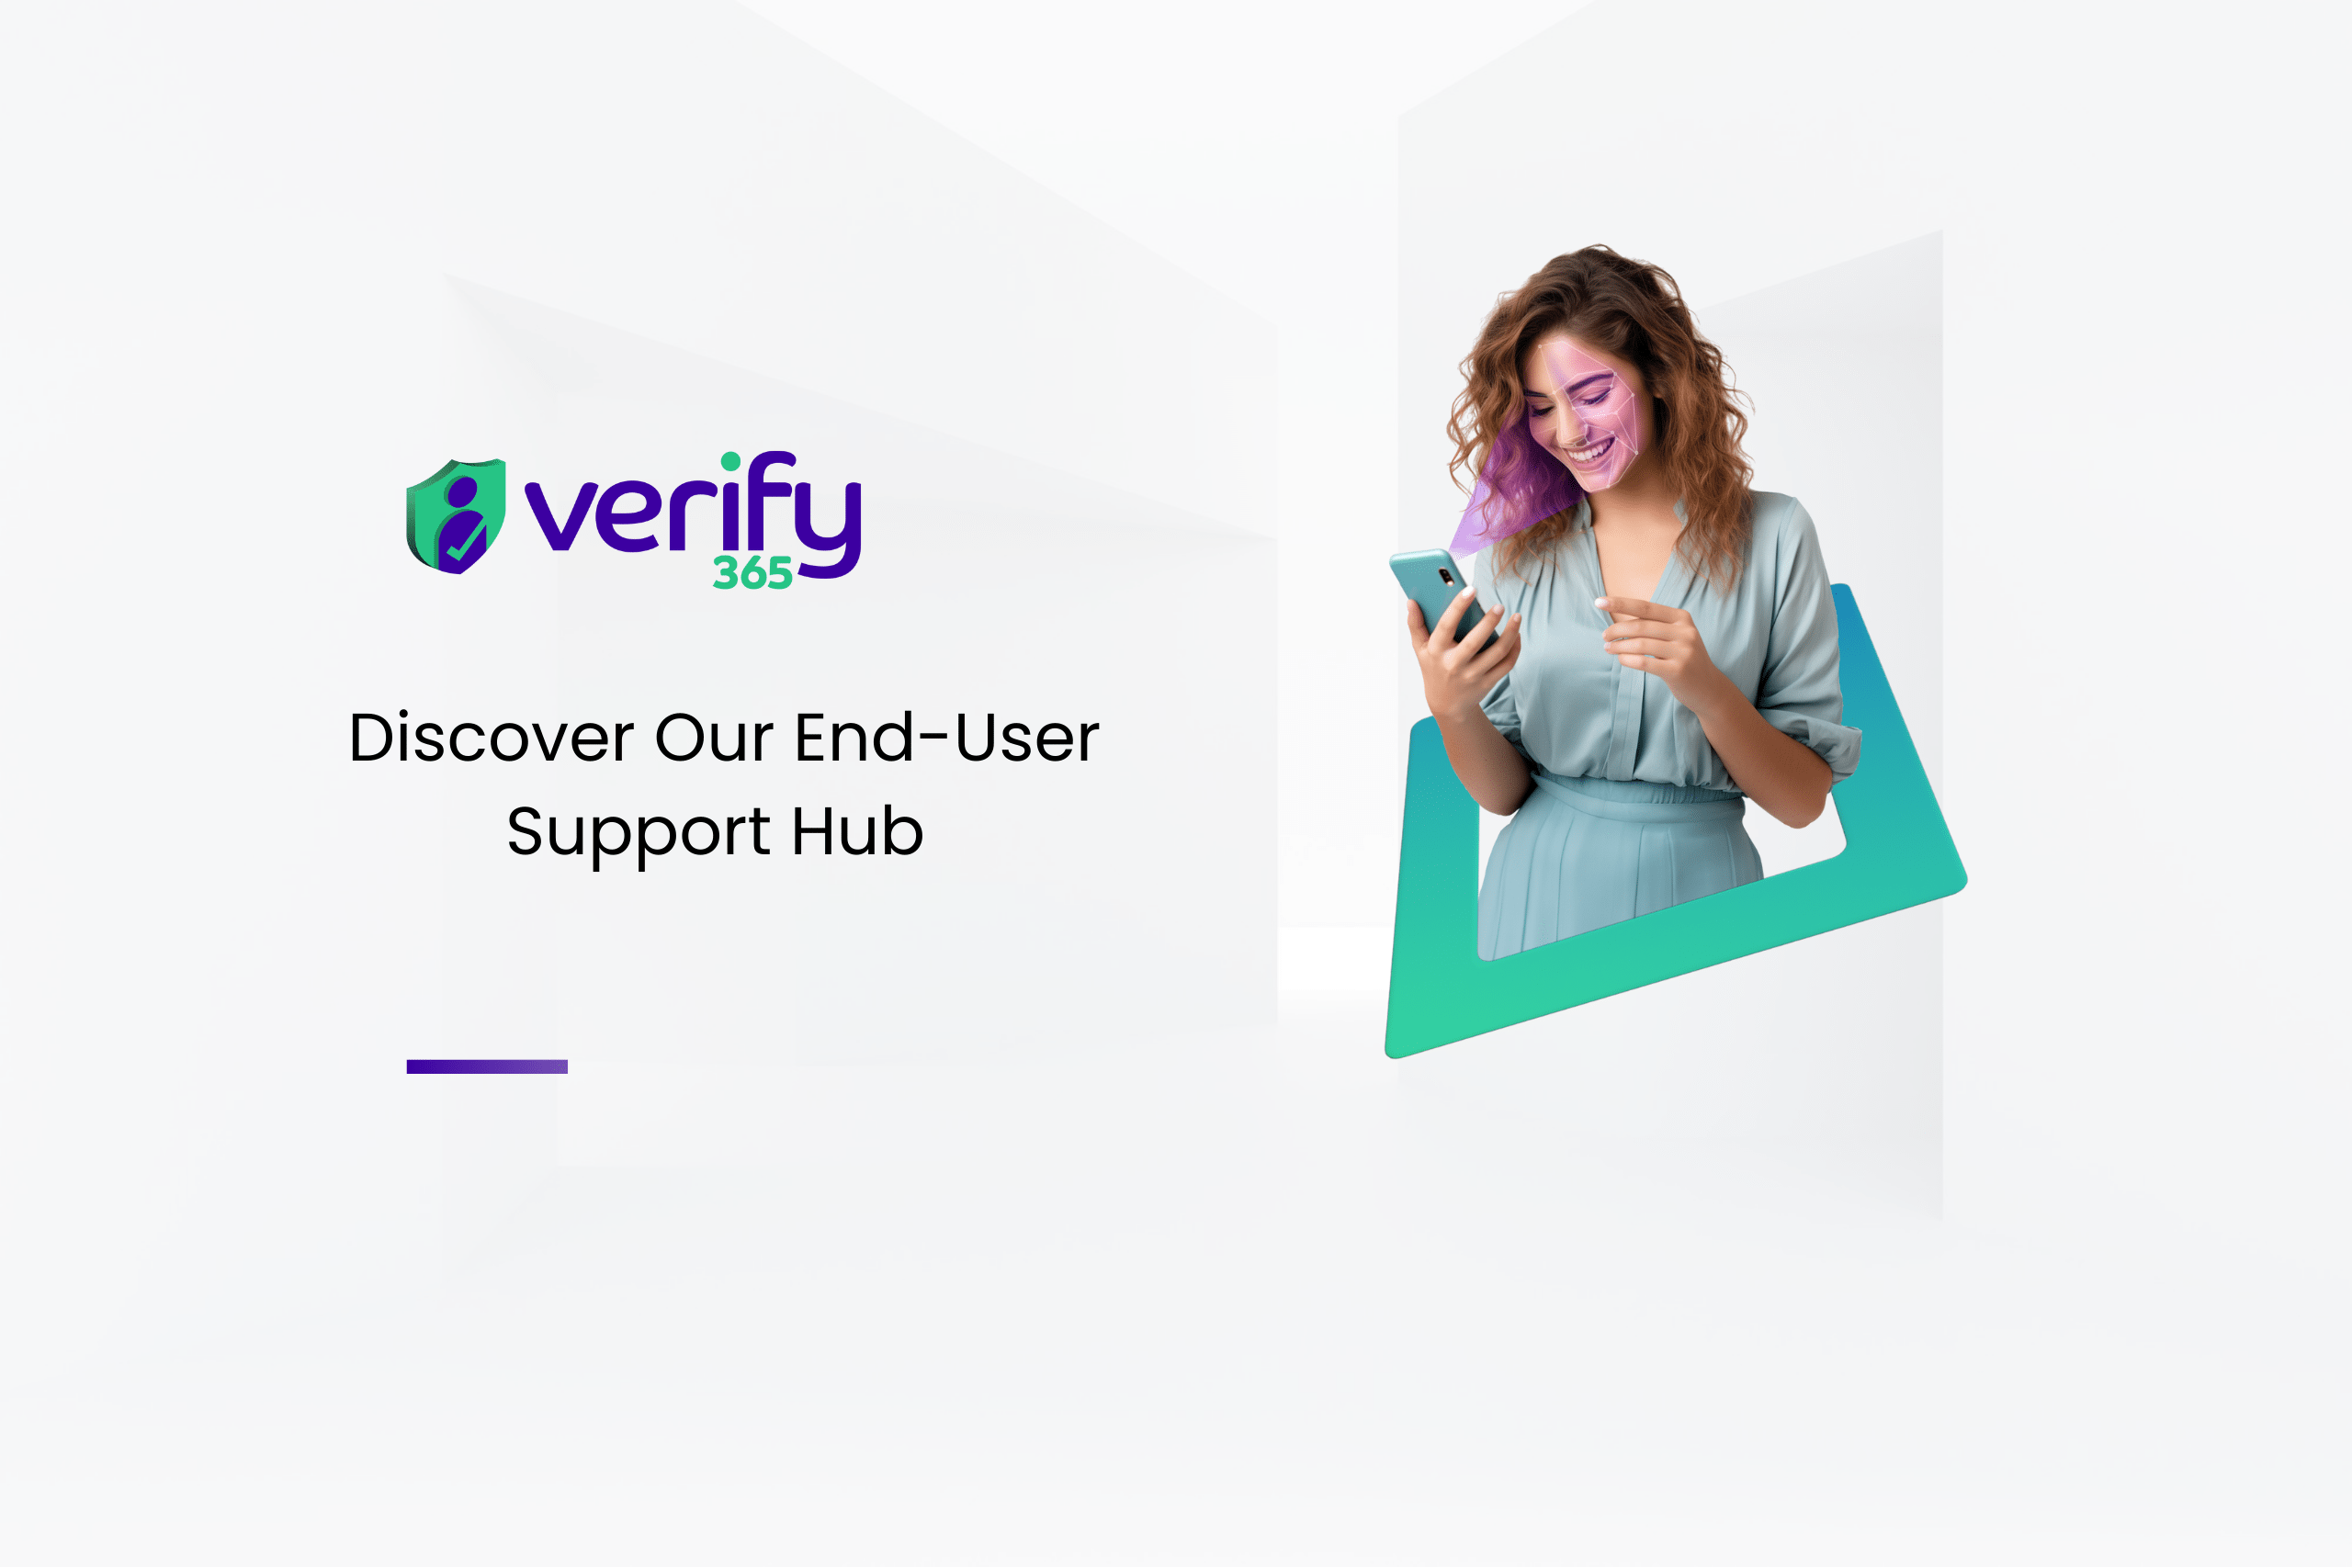 Verify 365's end-user support hub